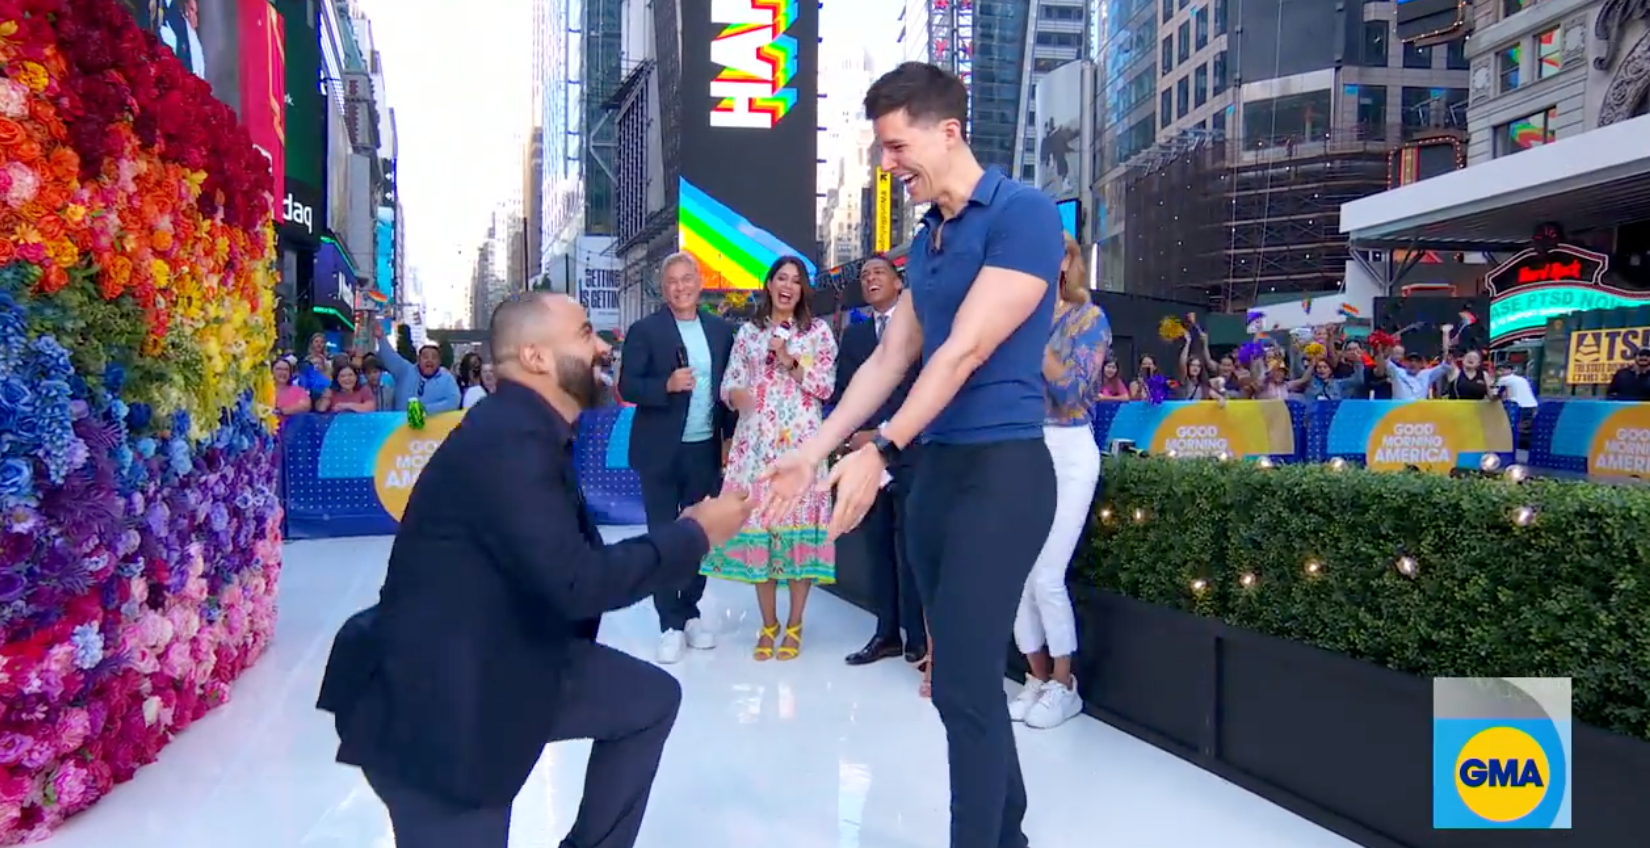 Man surprises boyfriend with marriage proposal with help from Good Morning America